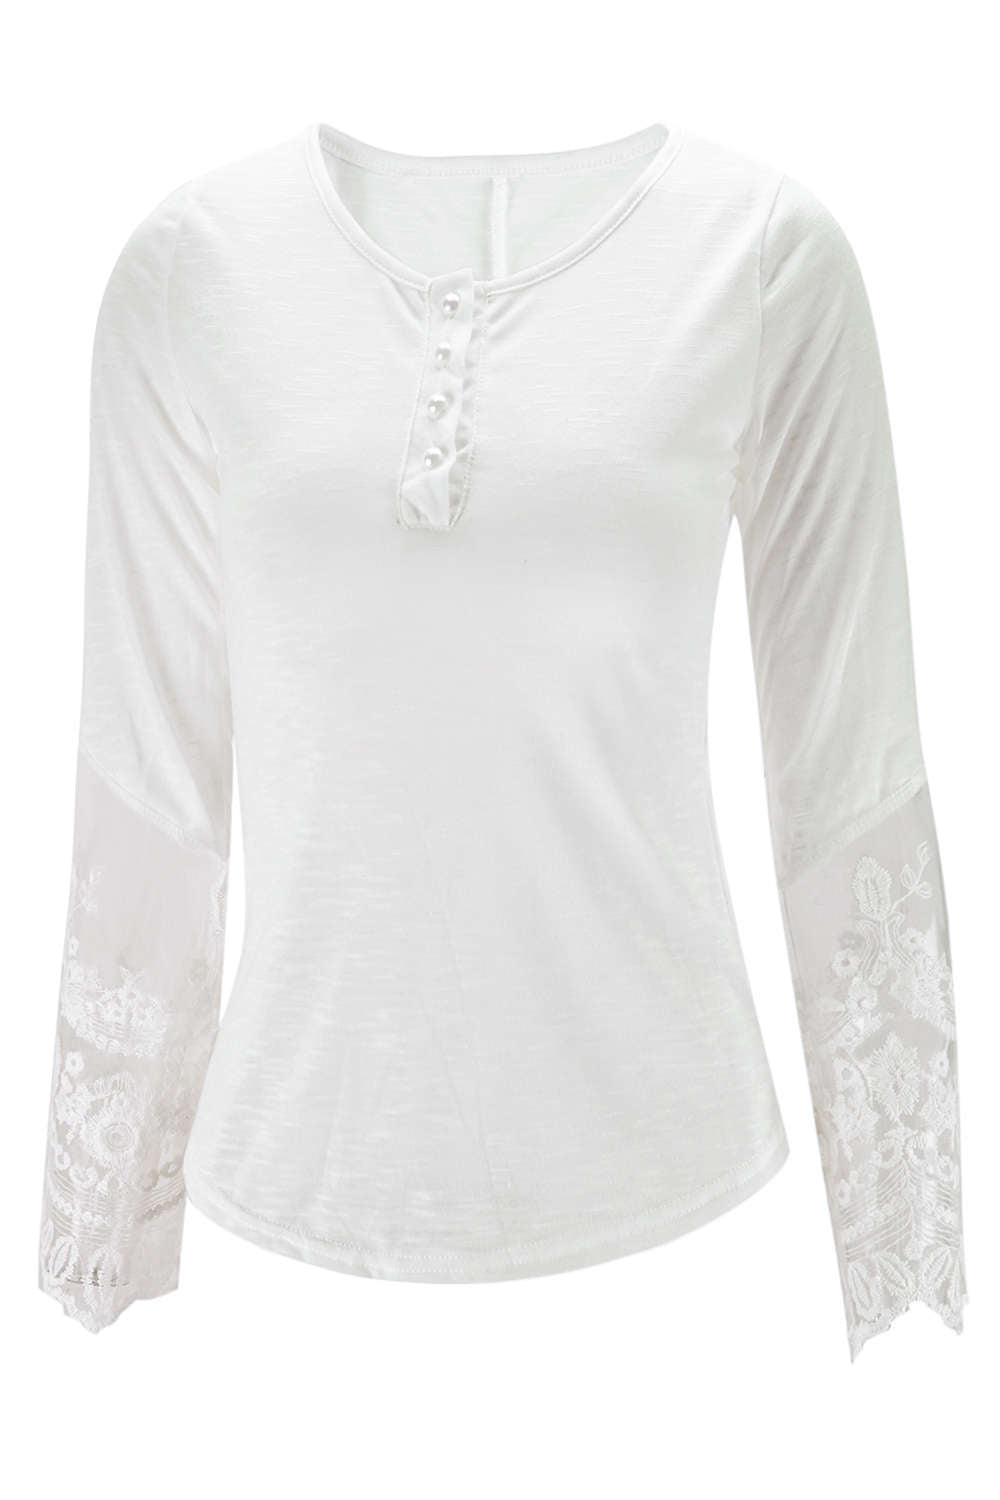 Iyasson Lace Cuff Splicing Scooped Neckline T-shirt Tops